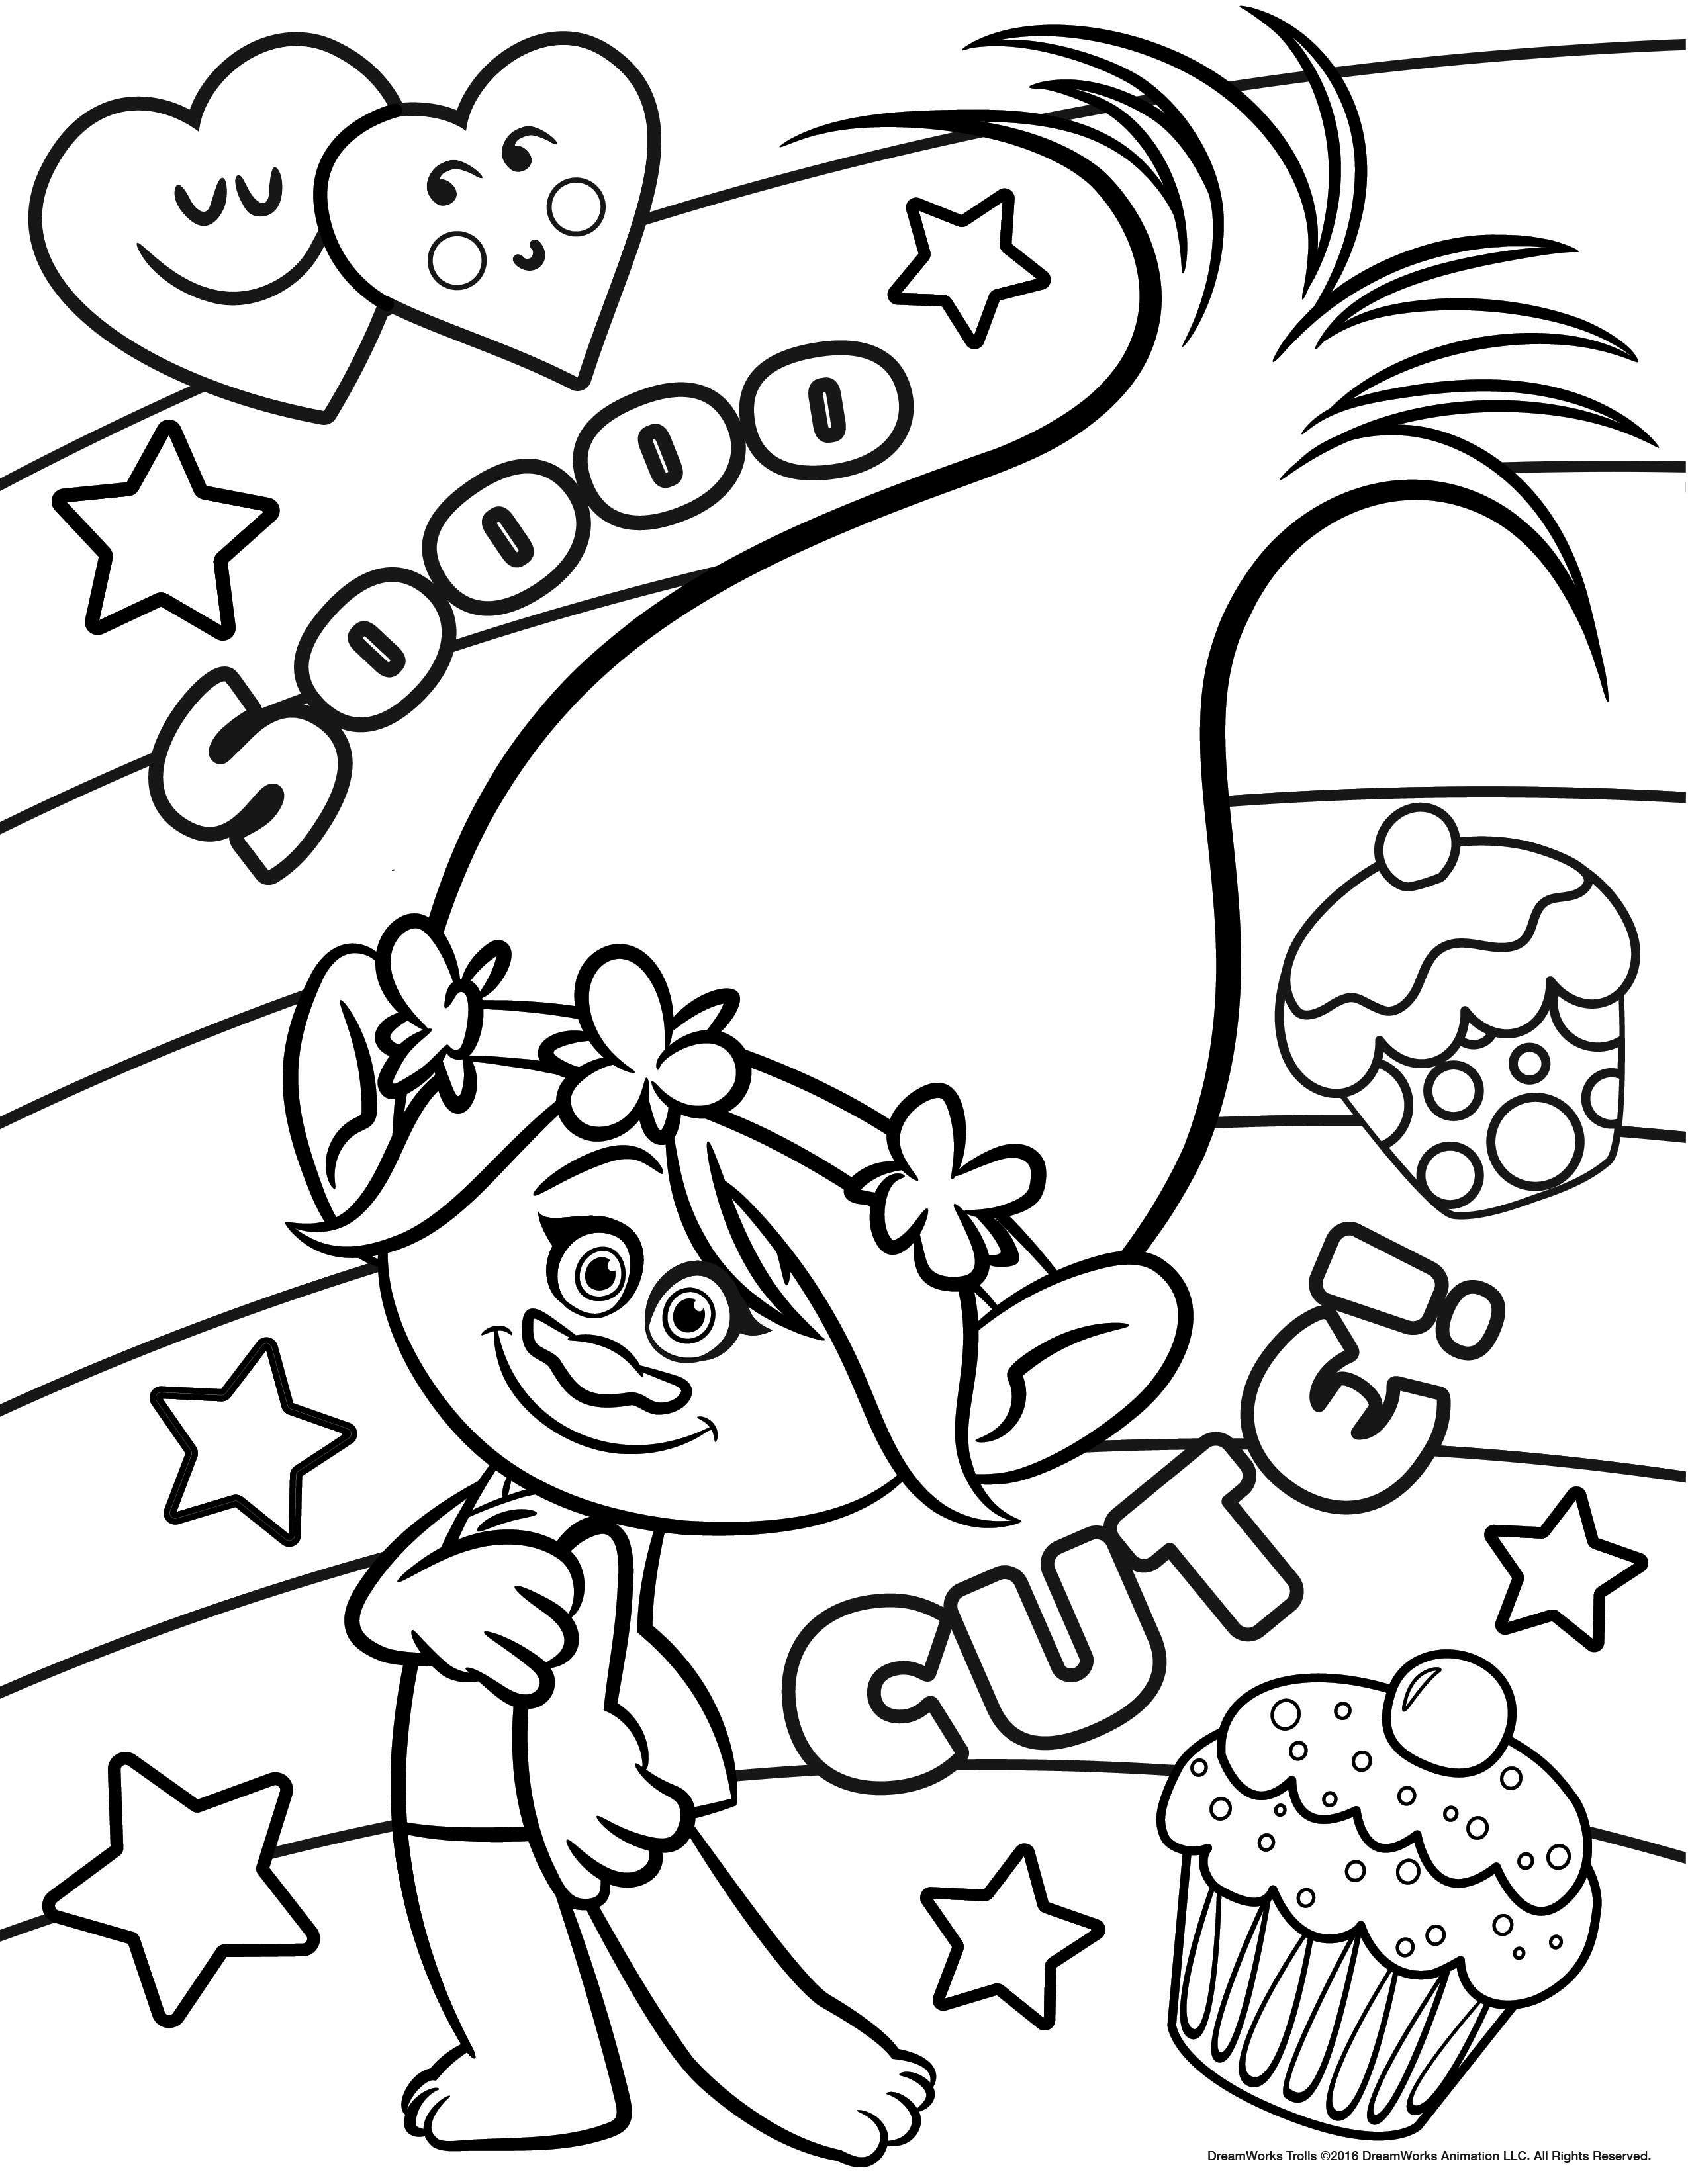 Trolls Movie Coloring Pages Coloring Pages Free Trolls Coloring Pages To Print 8x10